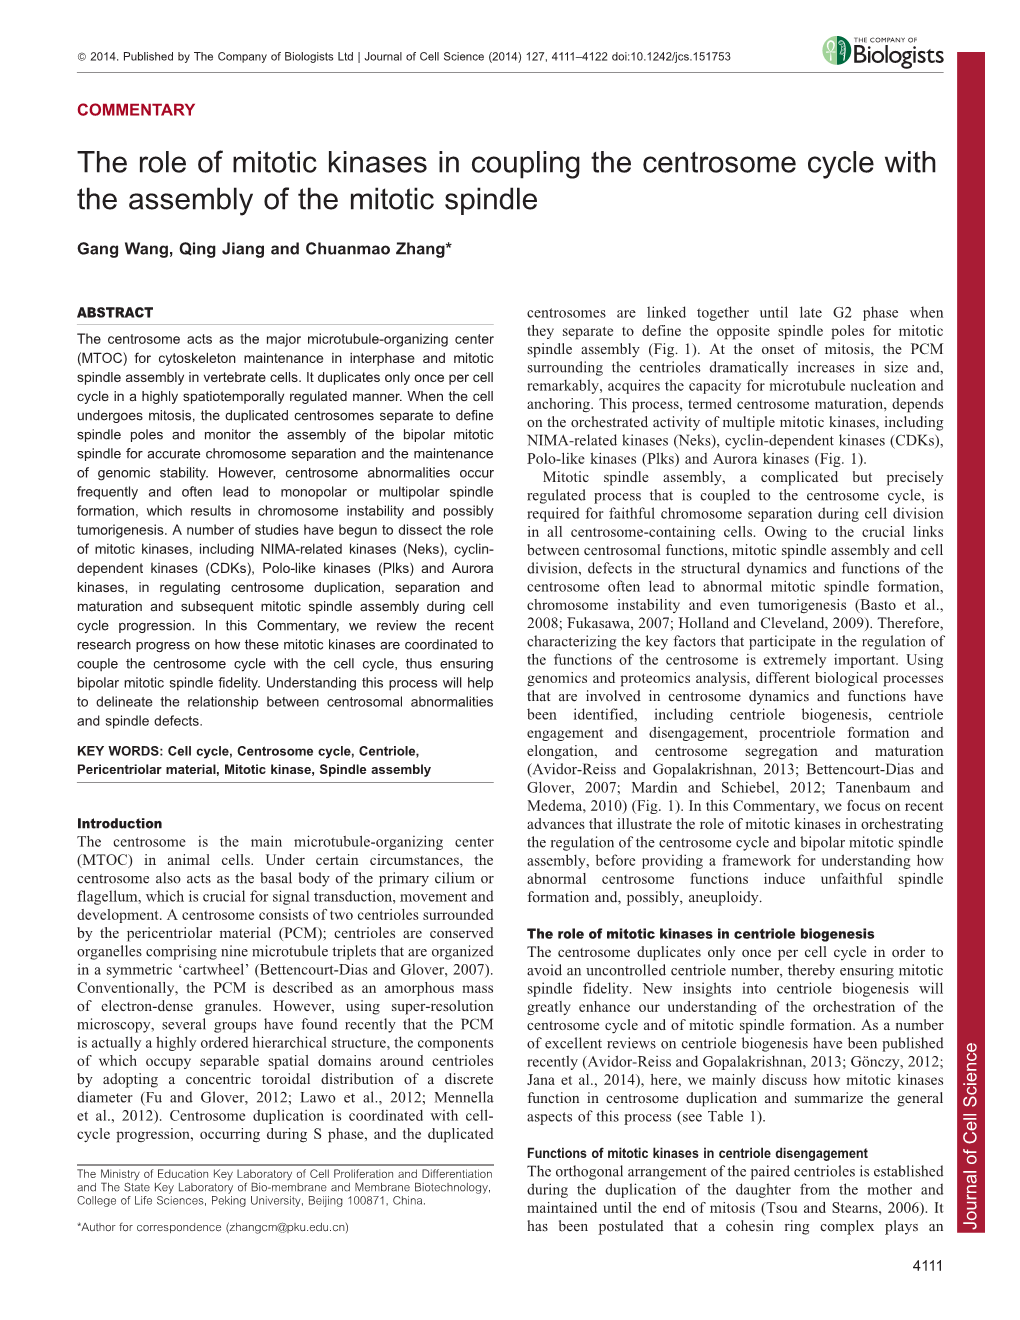 The Role of Mitotic Kinases in Coupling the Centrosome Cycle with the Assembly of the Mitotic Spindle